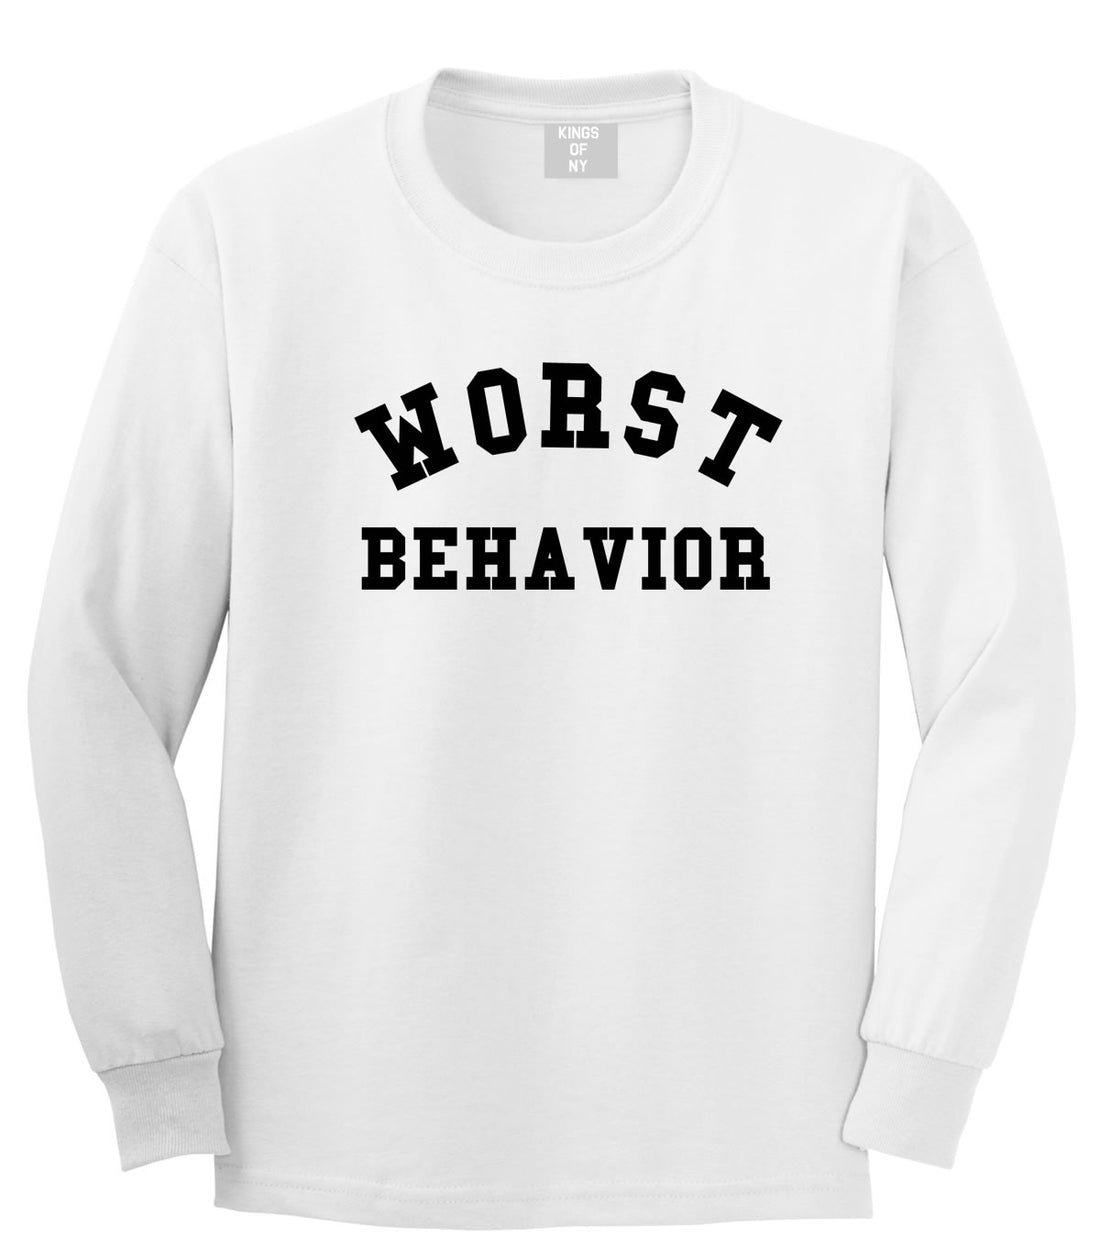 Worst Behavior Long Sleeve T-Shirt in White by Kings Of NY